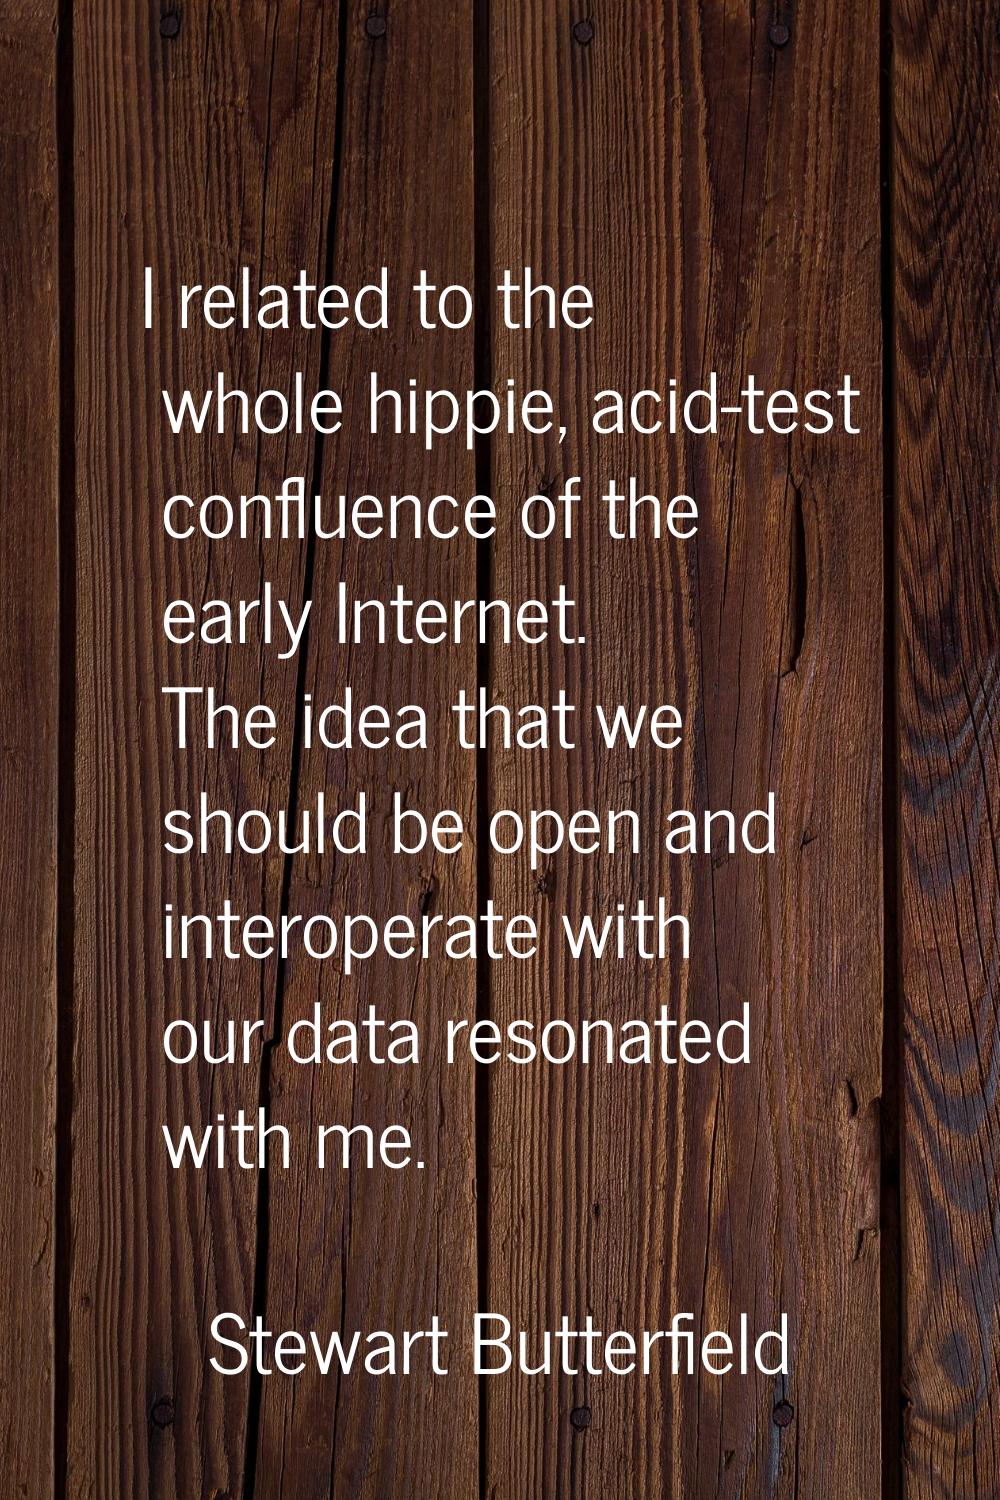 I related to the whole hippie, acid-test confluence of the early Internet. The idea that we should 